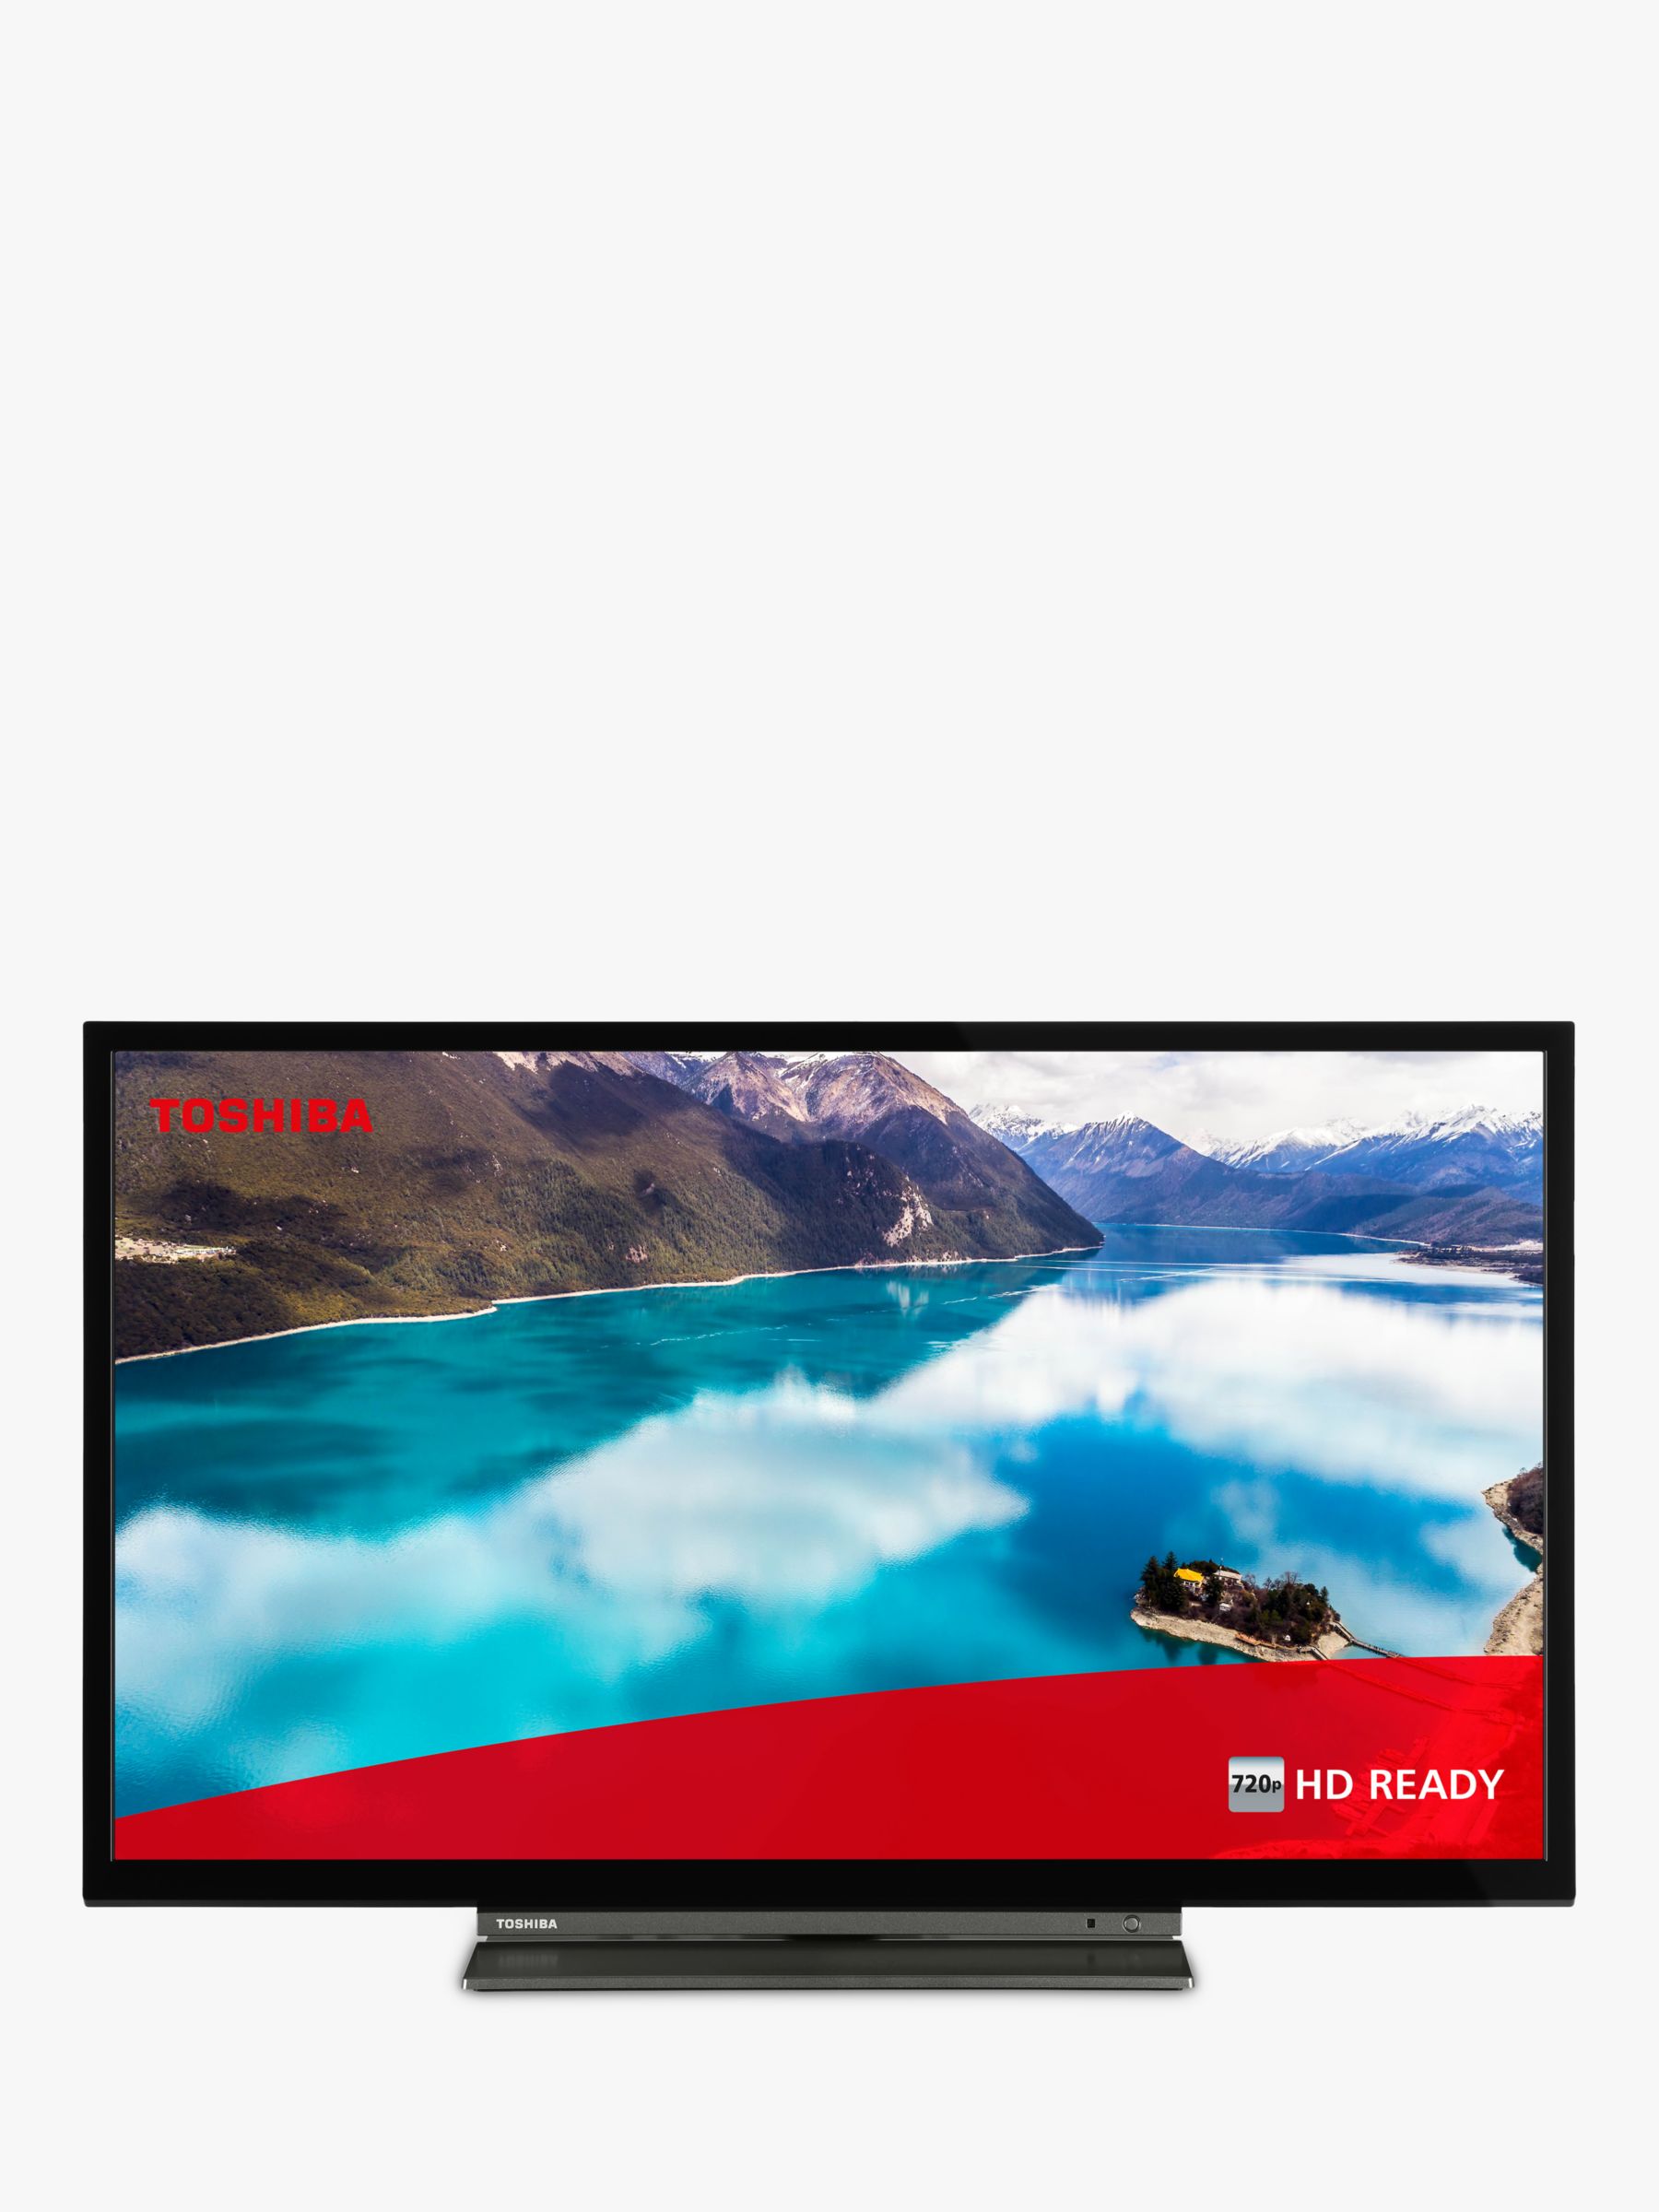 Toshiba 24WD3A63DB (2019) LED HD Ready 720p Smart TV/DVD Combi, 24” with Freeview Play, Black